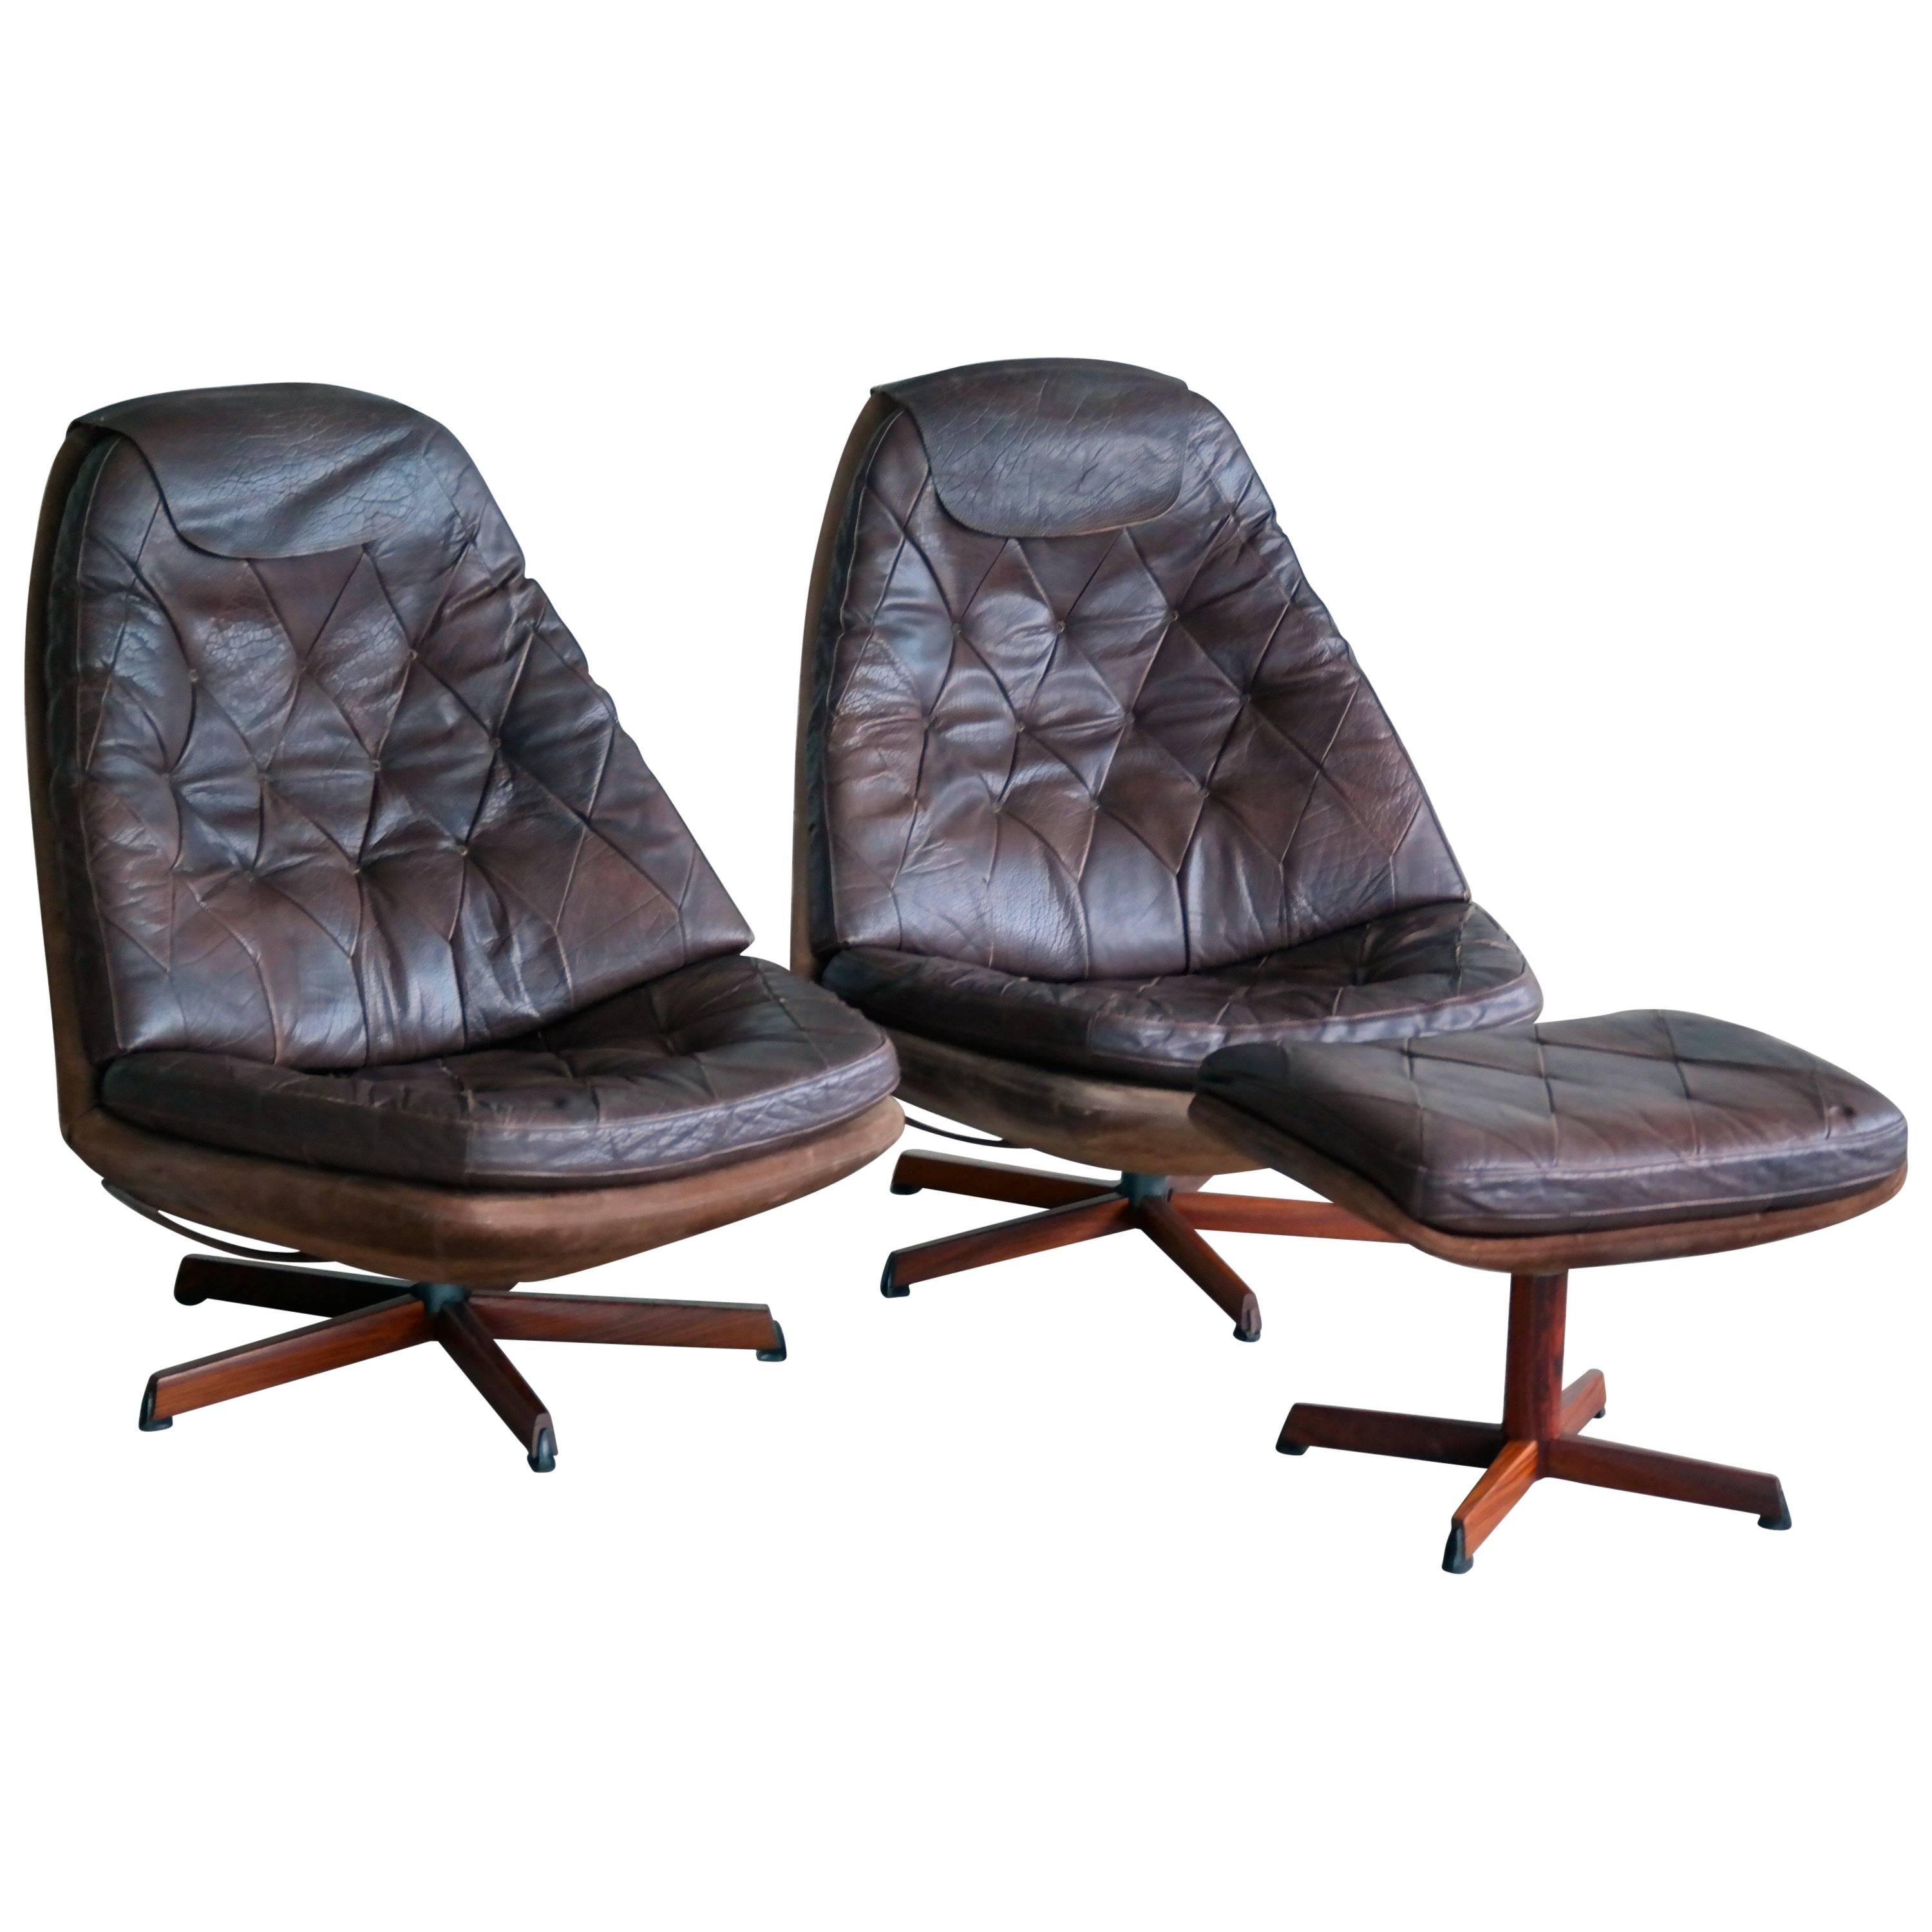 Madsen & Schubel Model MS68 Leather on Suede Swivel Lounge Chairs with Ottoman